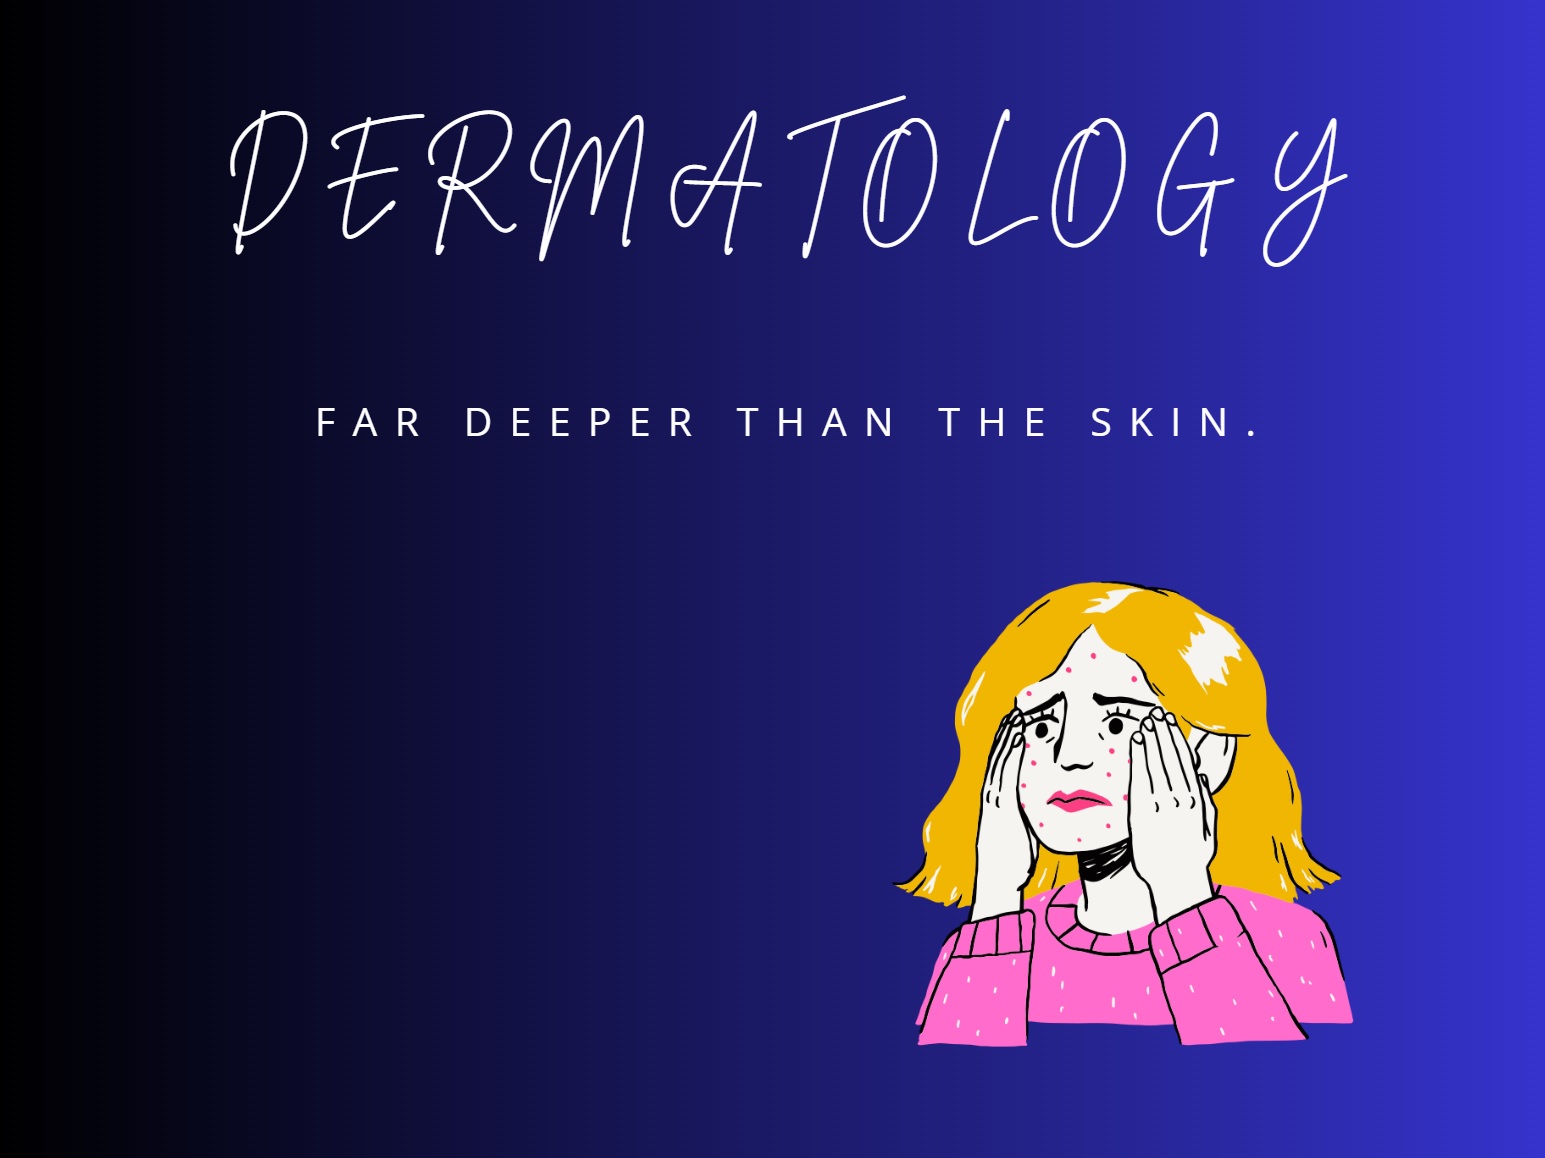 pg thesis topics in dermatology